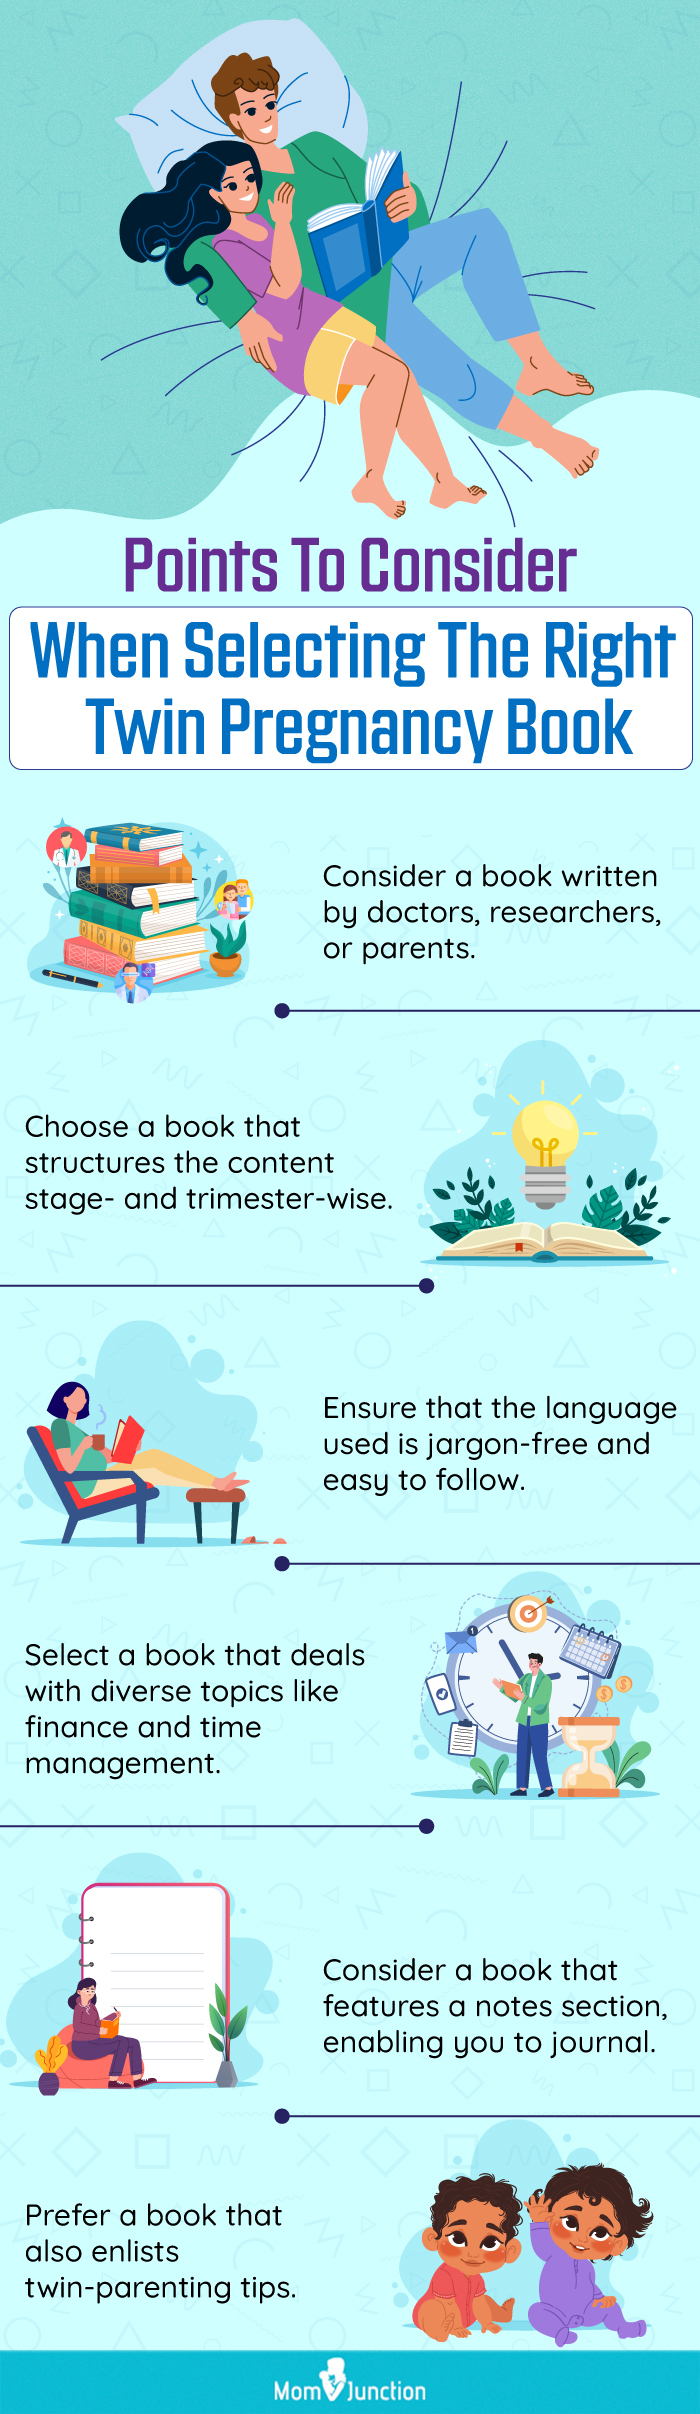 Points To Consider When Selecting The Right Twin Pregnancy Book (infographic)